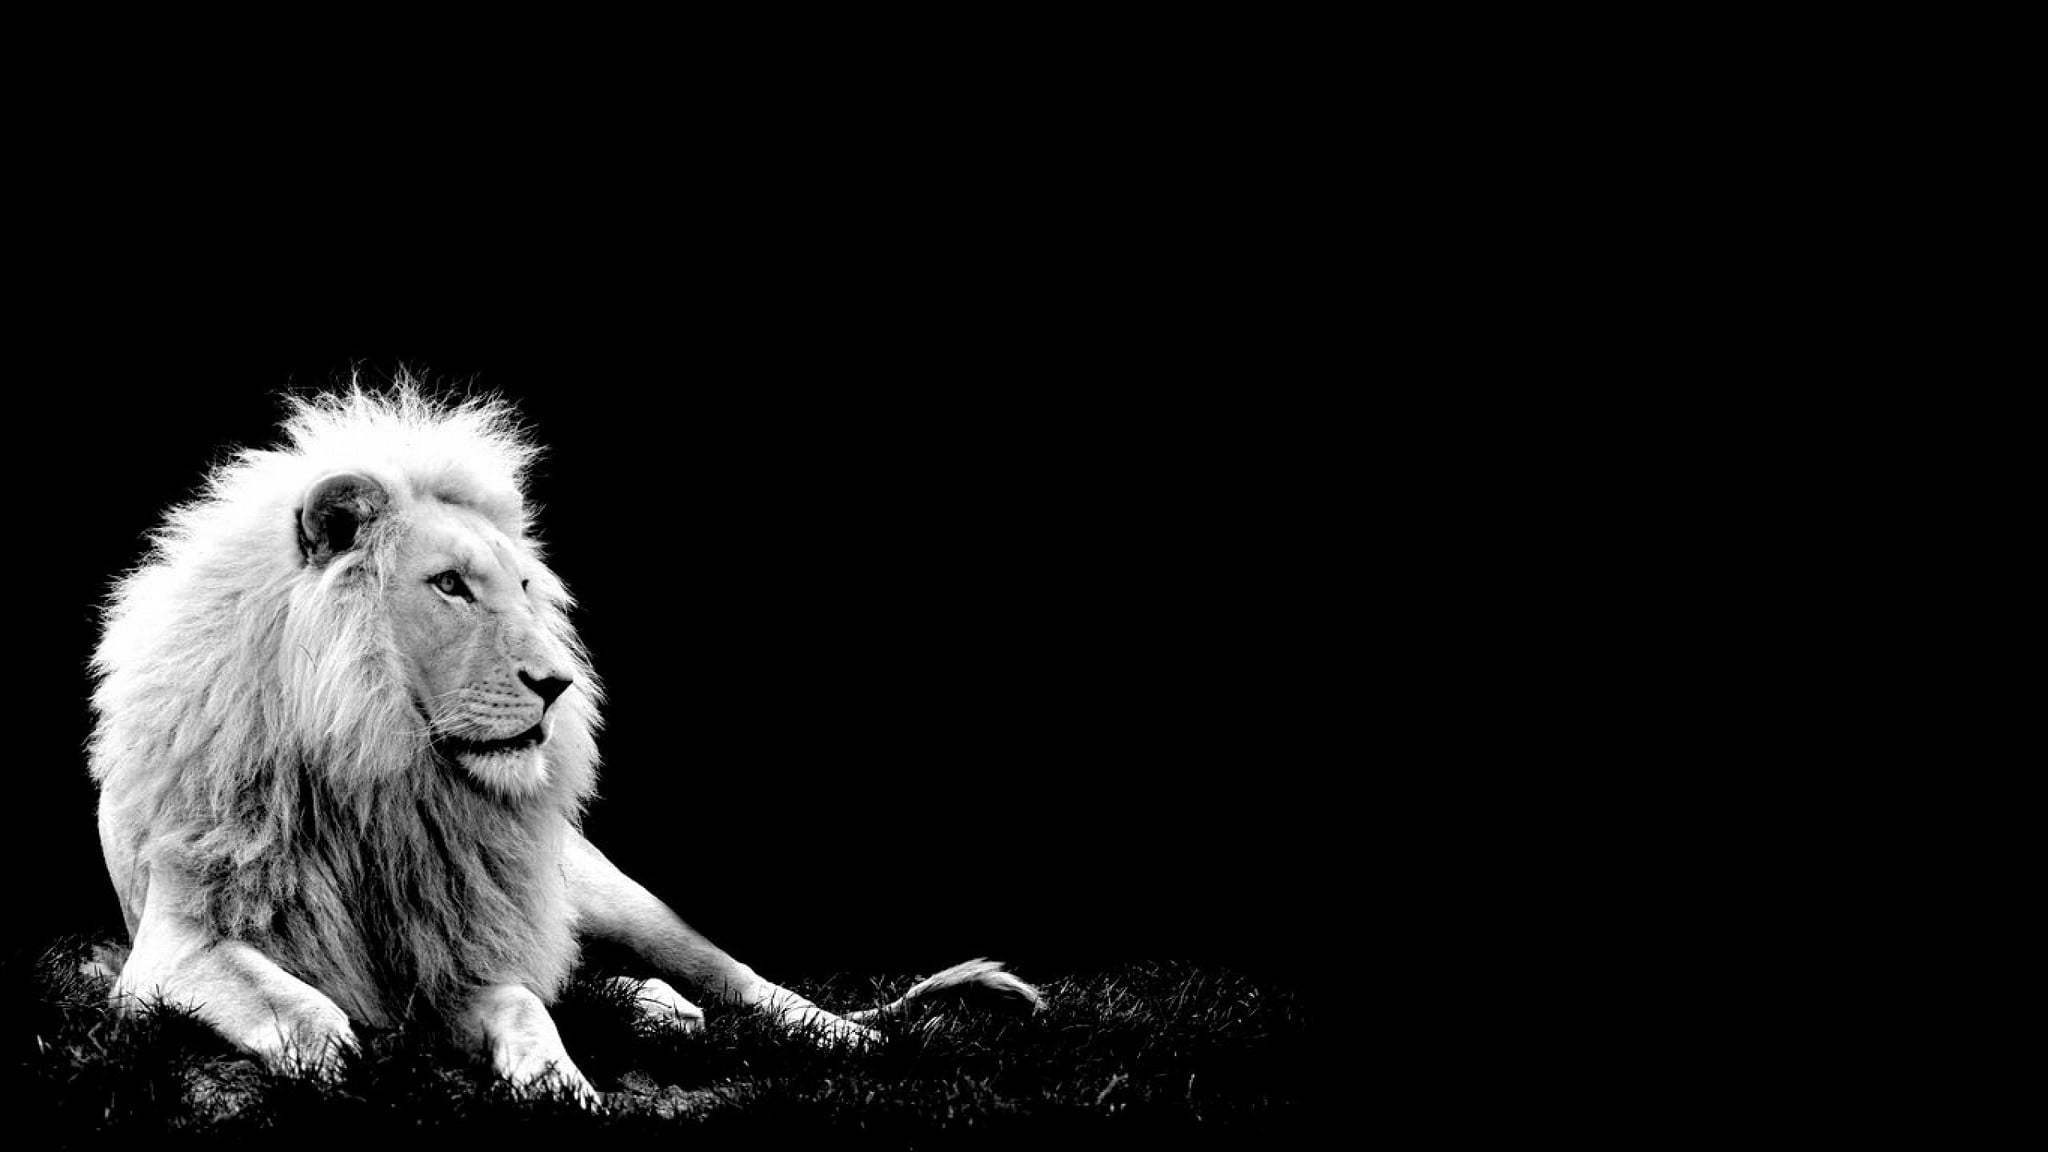 Awesome White Lion Black Background Picture. You Been Exposed